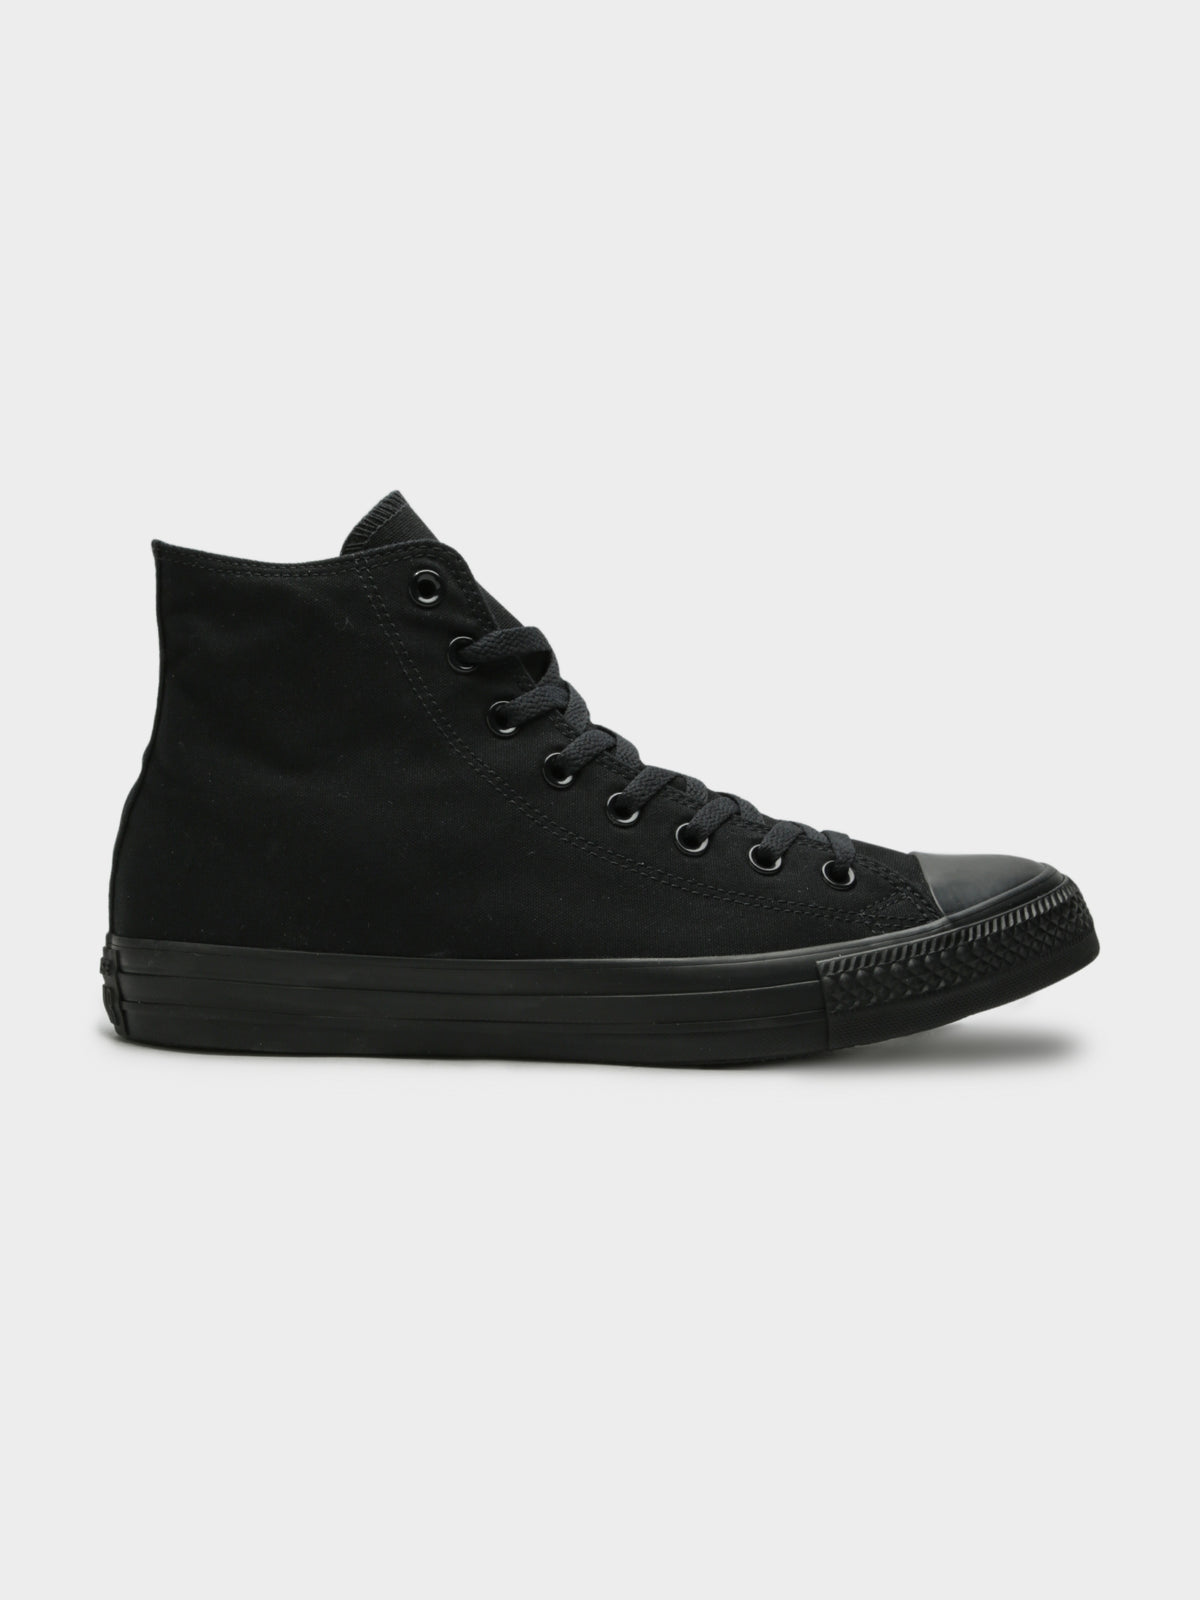 Unisex Chuck Taylor All Star Classic High-Top Sneakers in Black Canvas